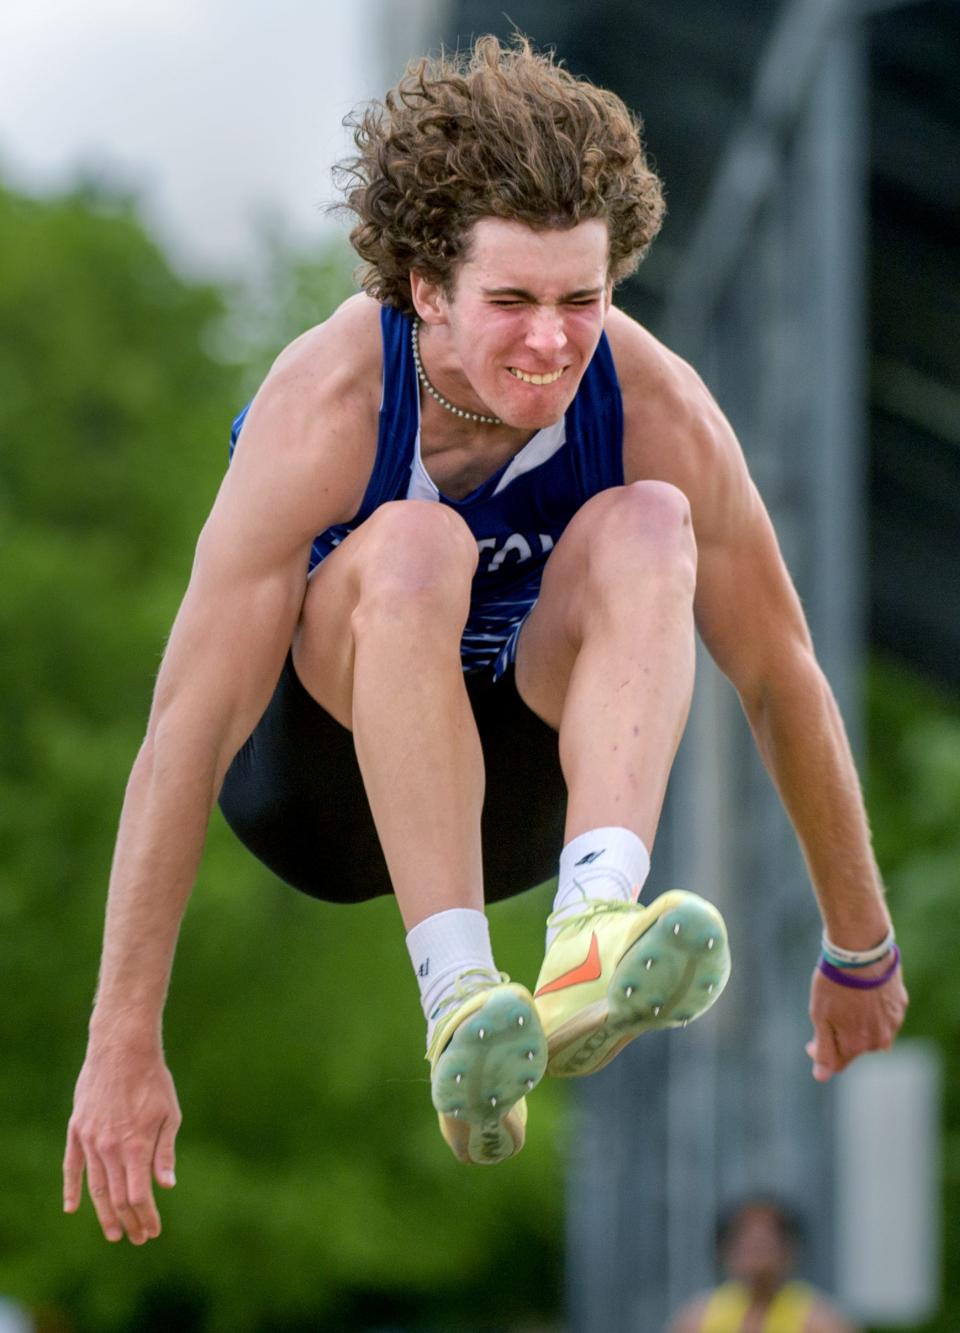 Limestone's Sam Morse takes flight in the long jump during the Class 2A Metamora Sectional track and field meet Wednesday, May 18, 2022 at Metamora High School. Morse won the event with a jump of 6.73 meters.